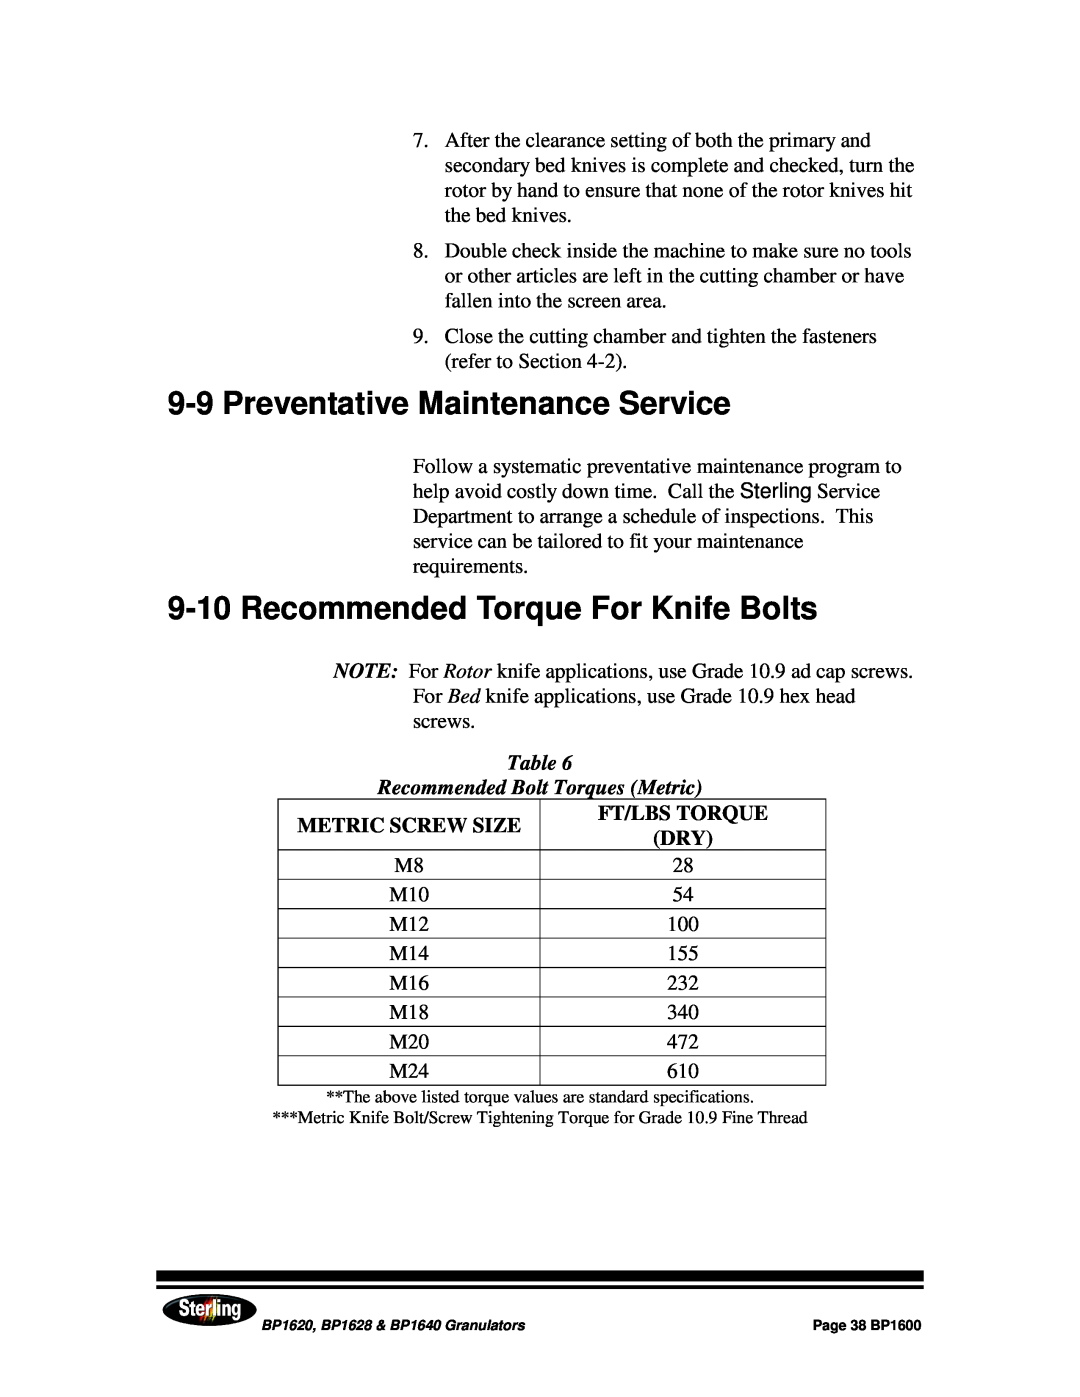 Sterling BP1620, BP1628 9-9Preventative Maintenance Service, 9-10Recommended Torque For Knife Bolts, Metric Screw Size 